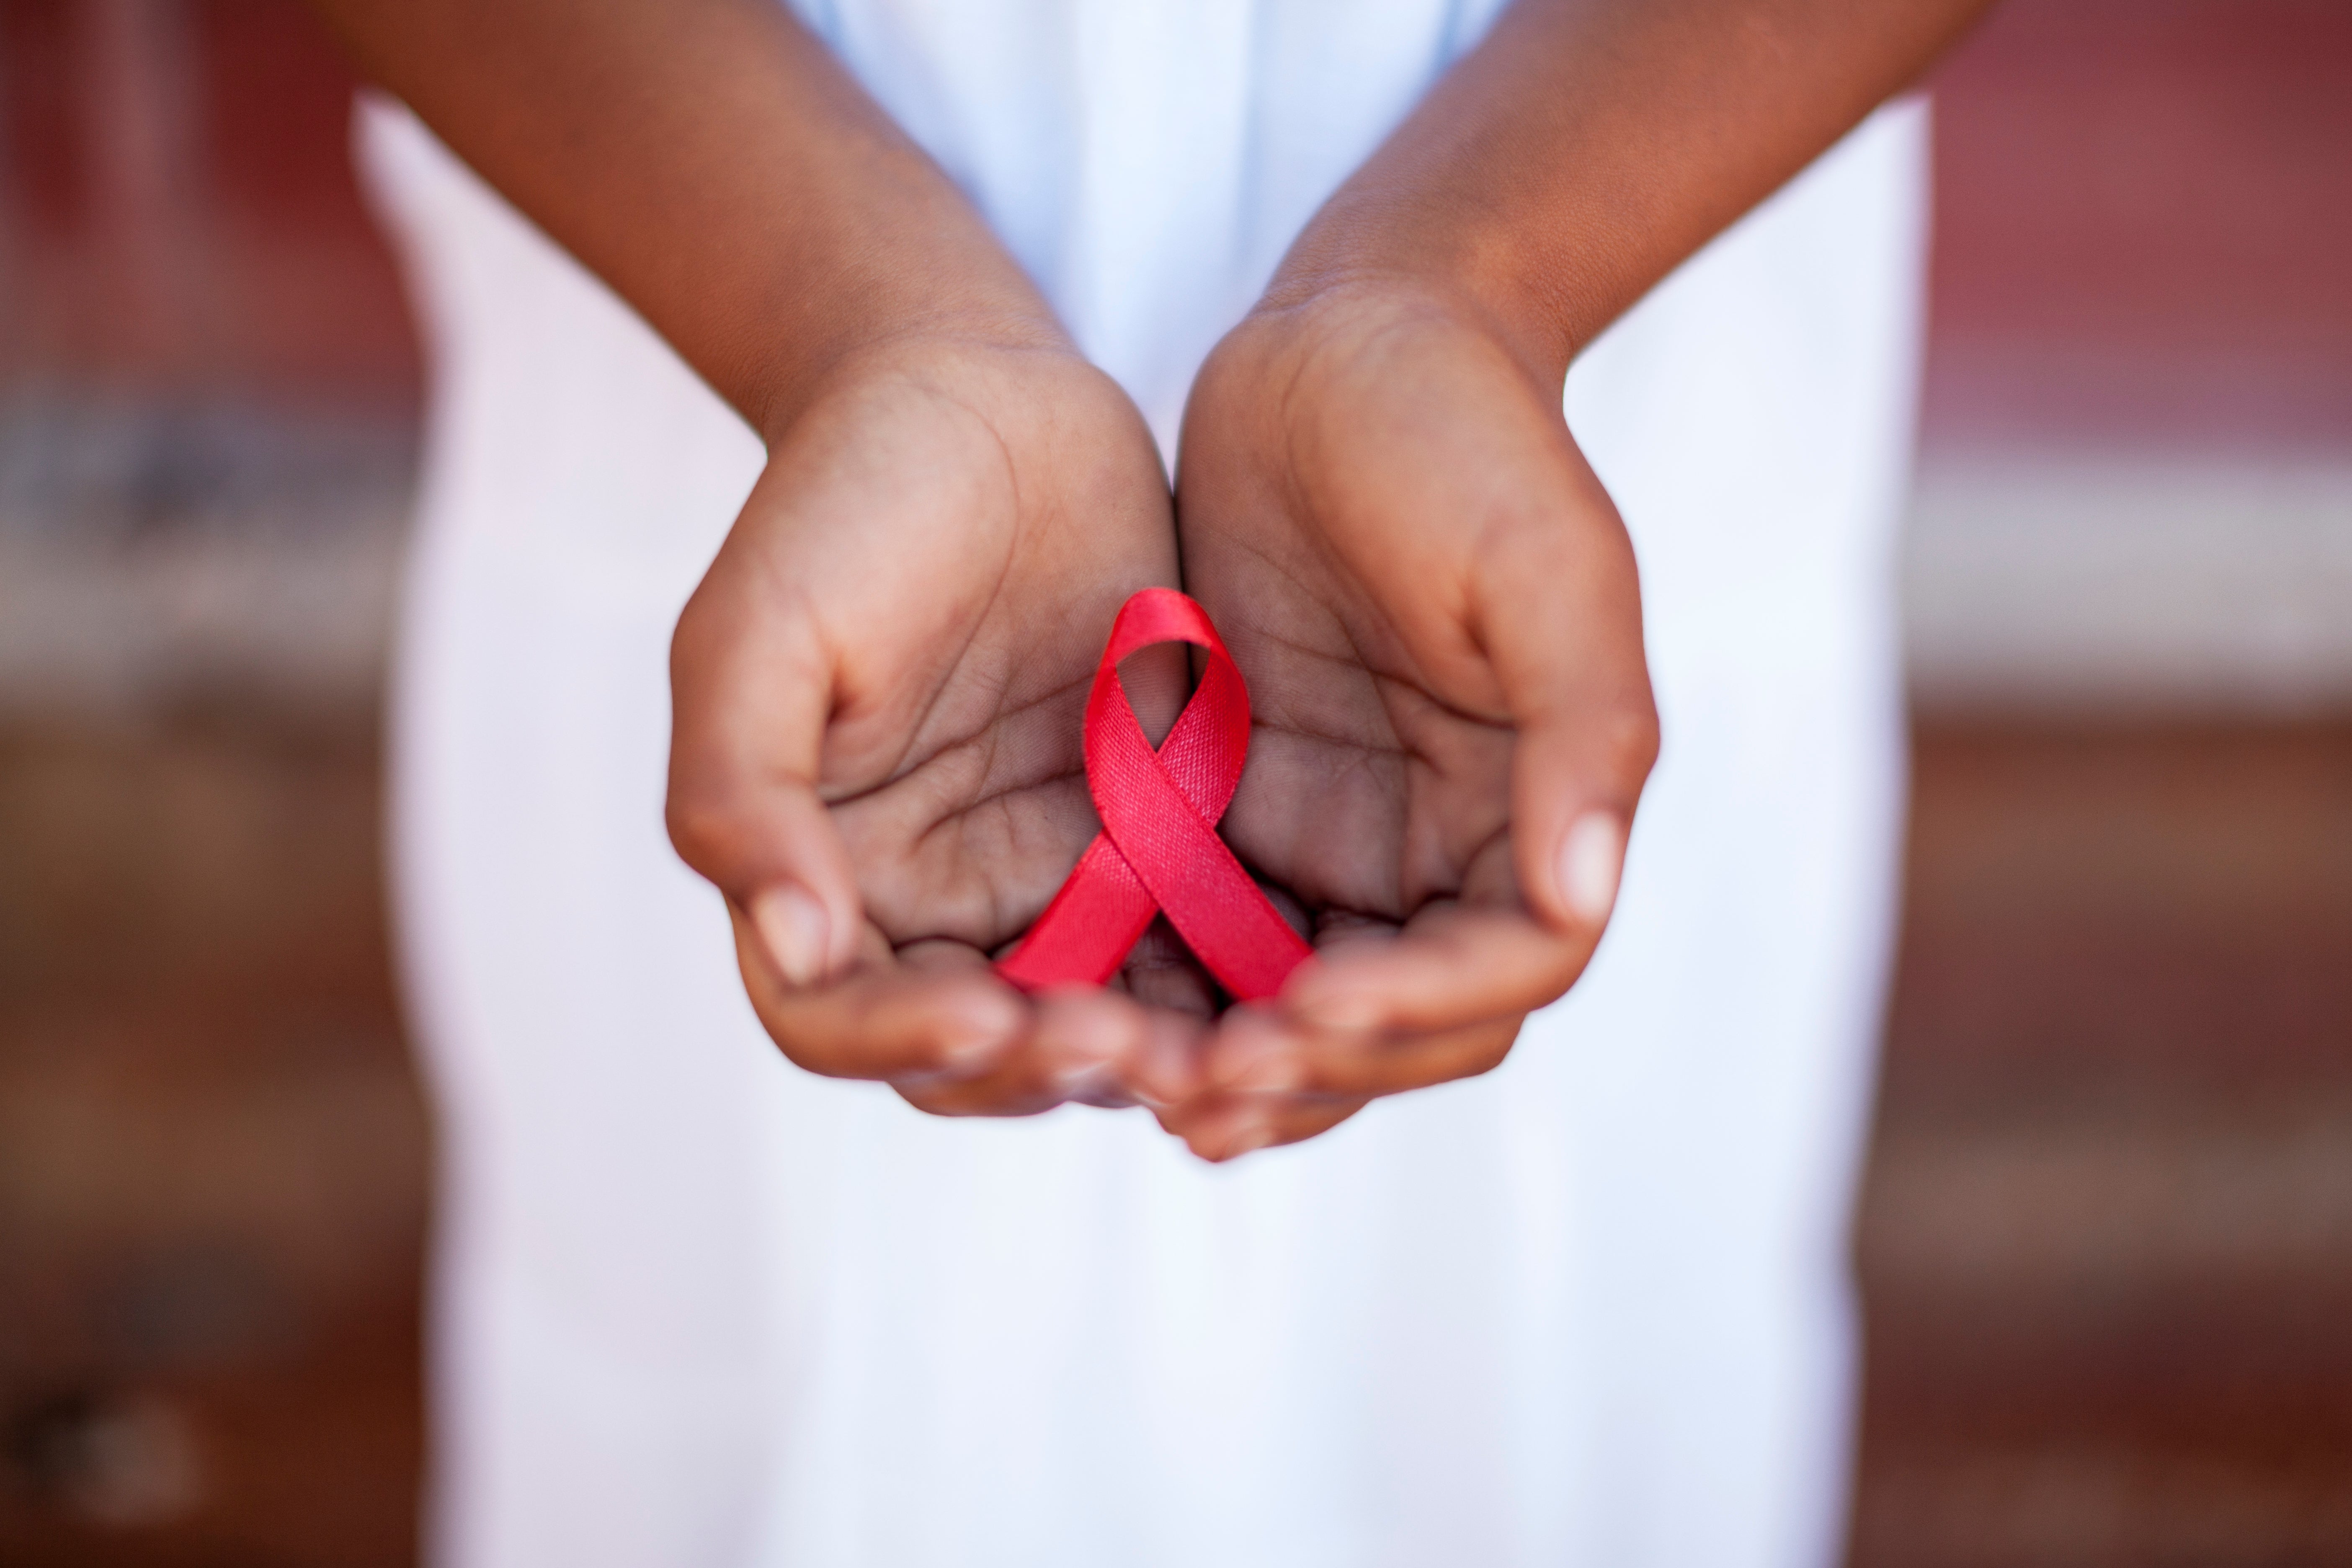 Sisters, Our Fight Against HIV/AIDS Has Come A Long Way, But There’s More Work To Be Done